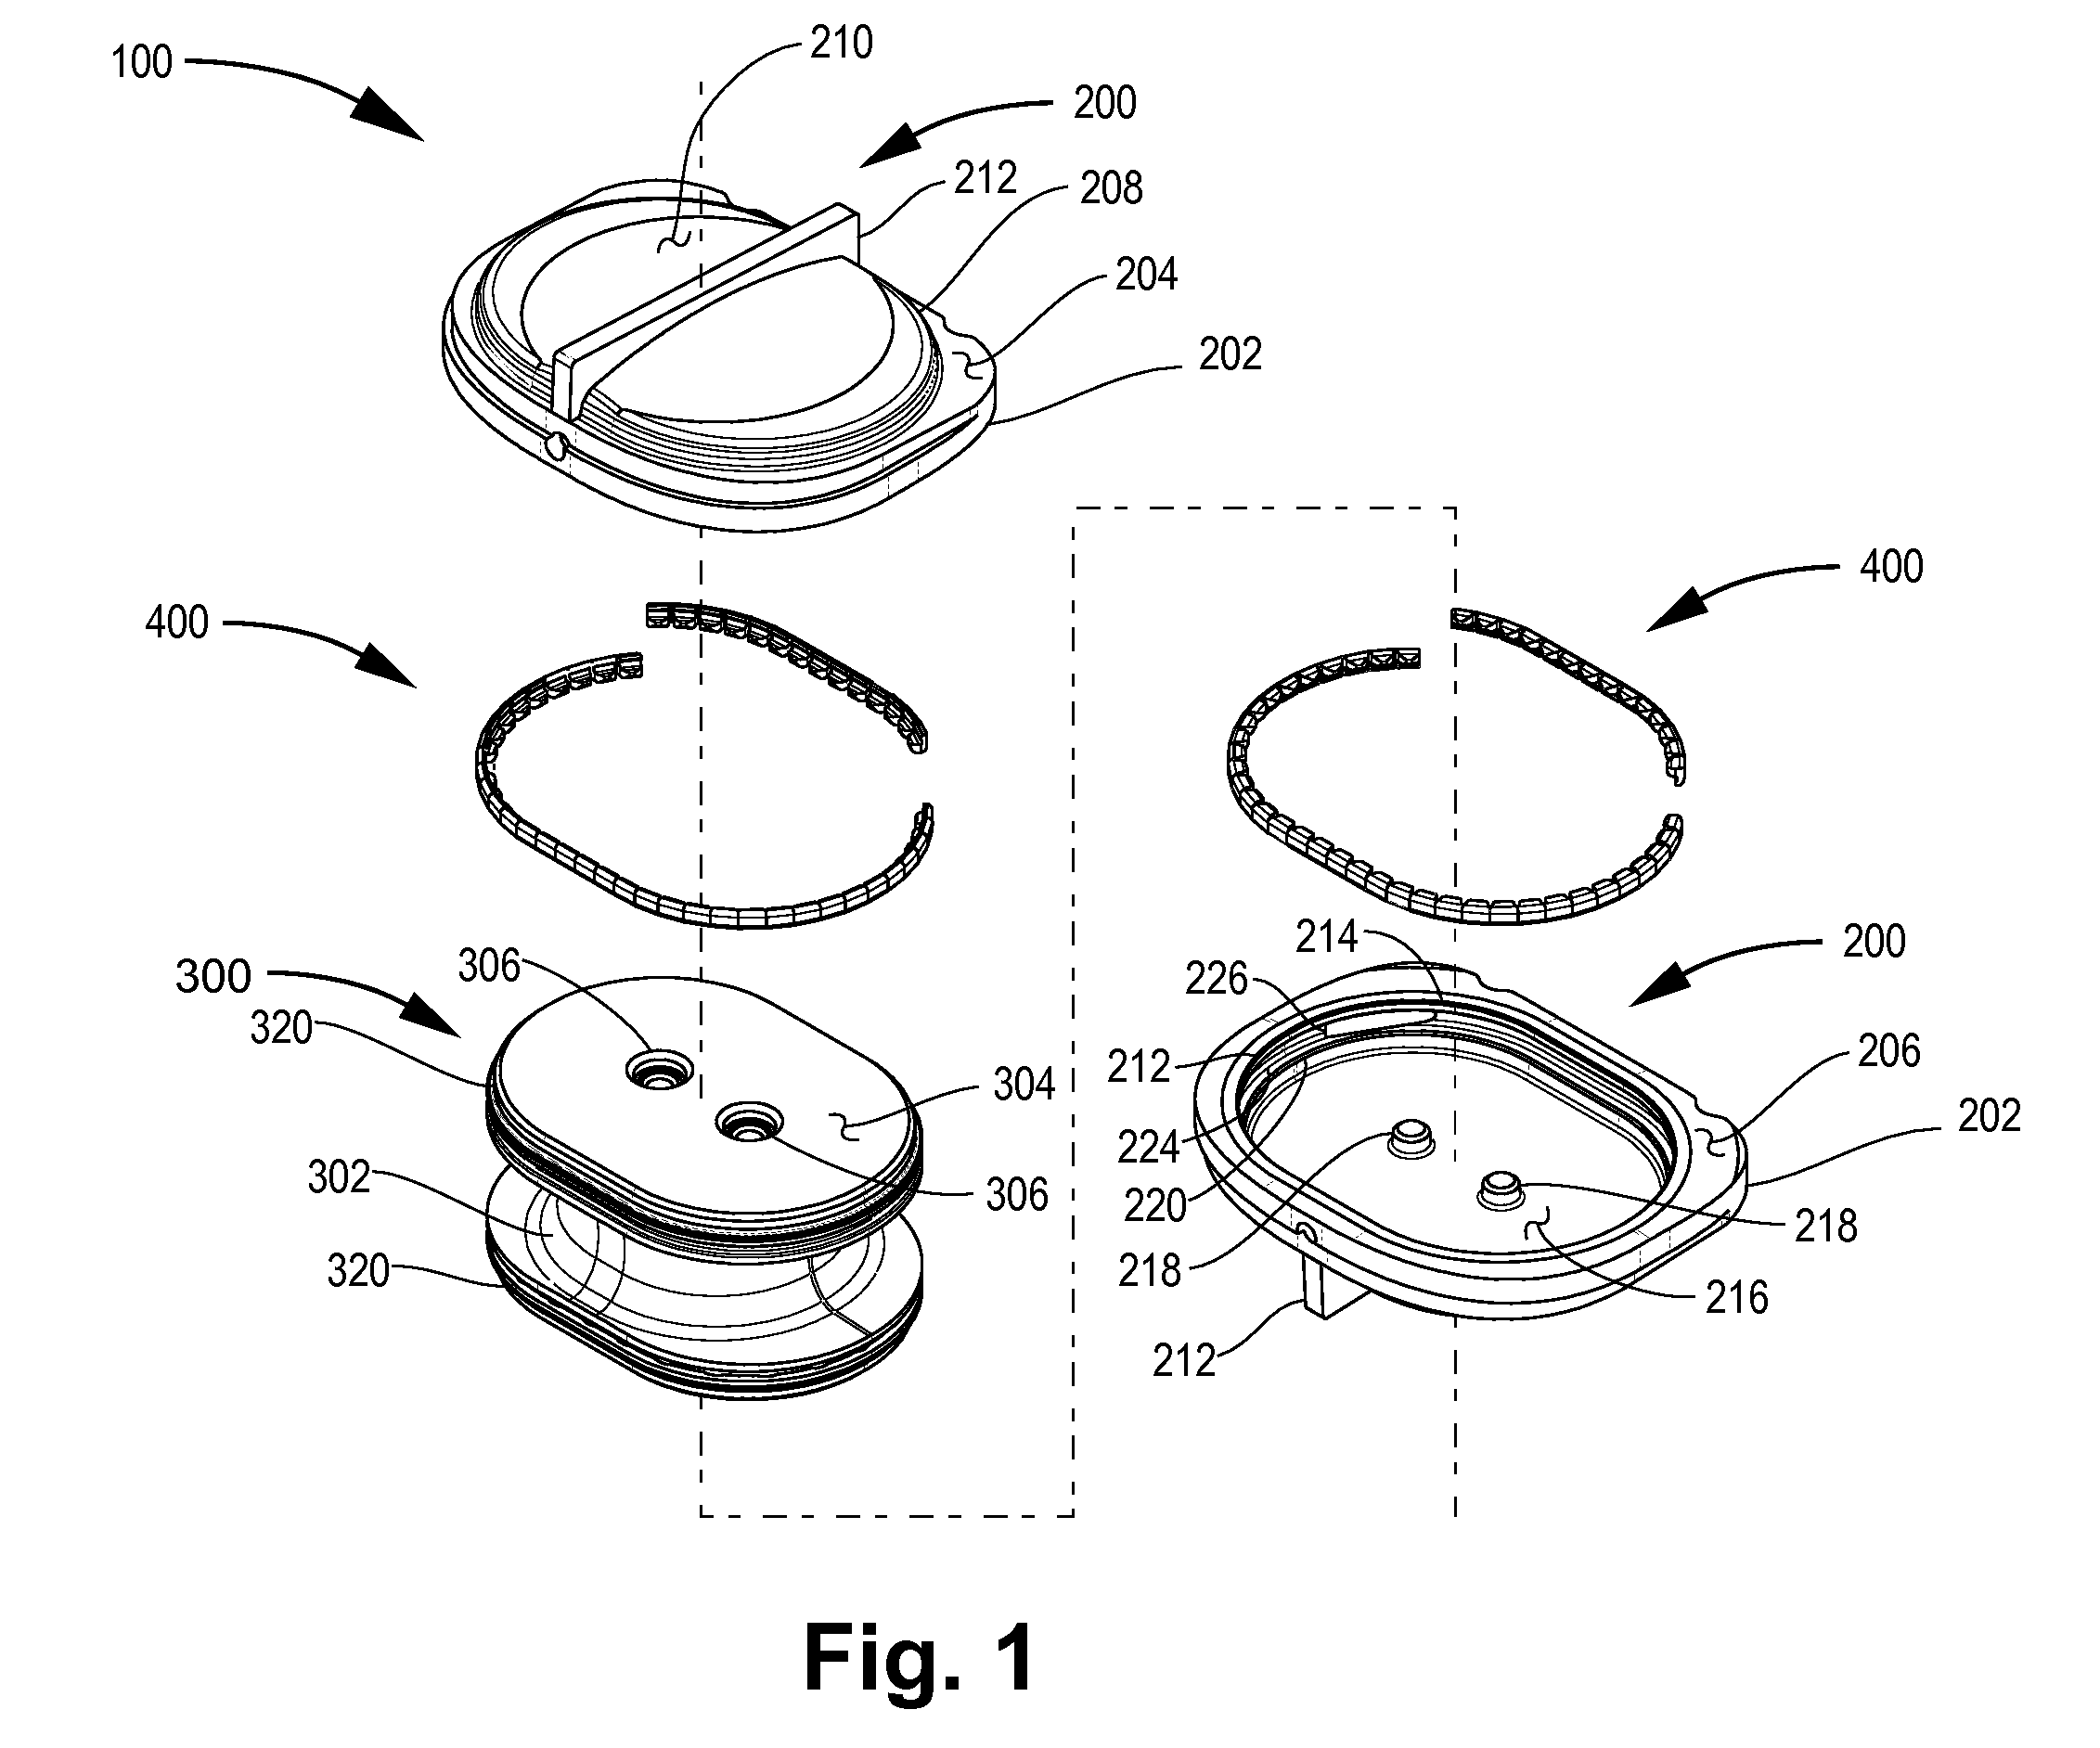 Orthopedic device assembly with elements coupled by a retaining structure